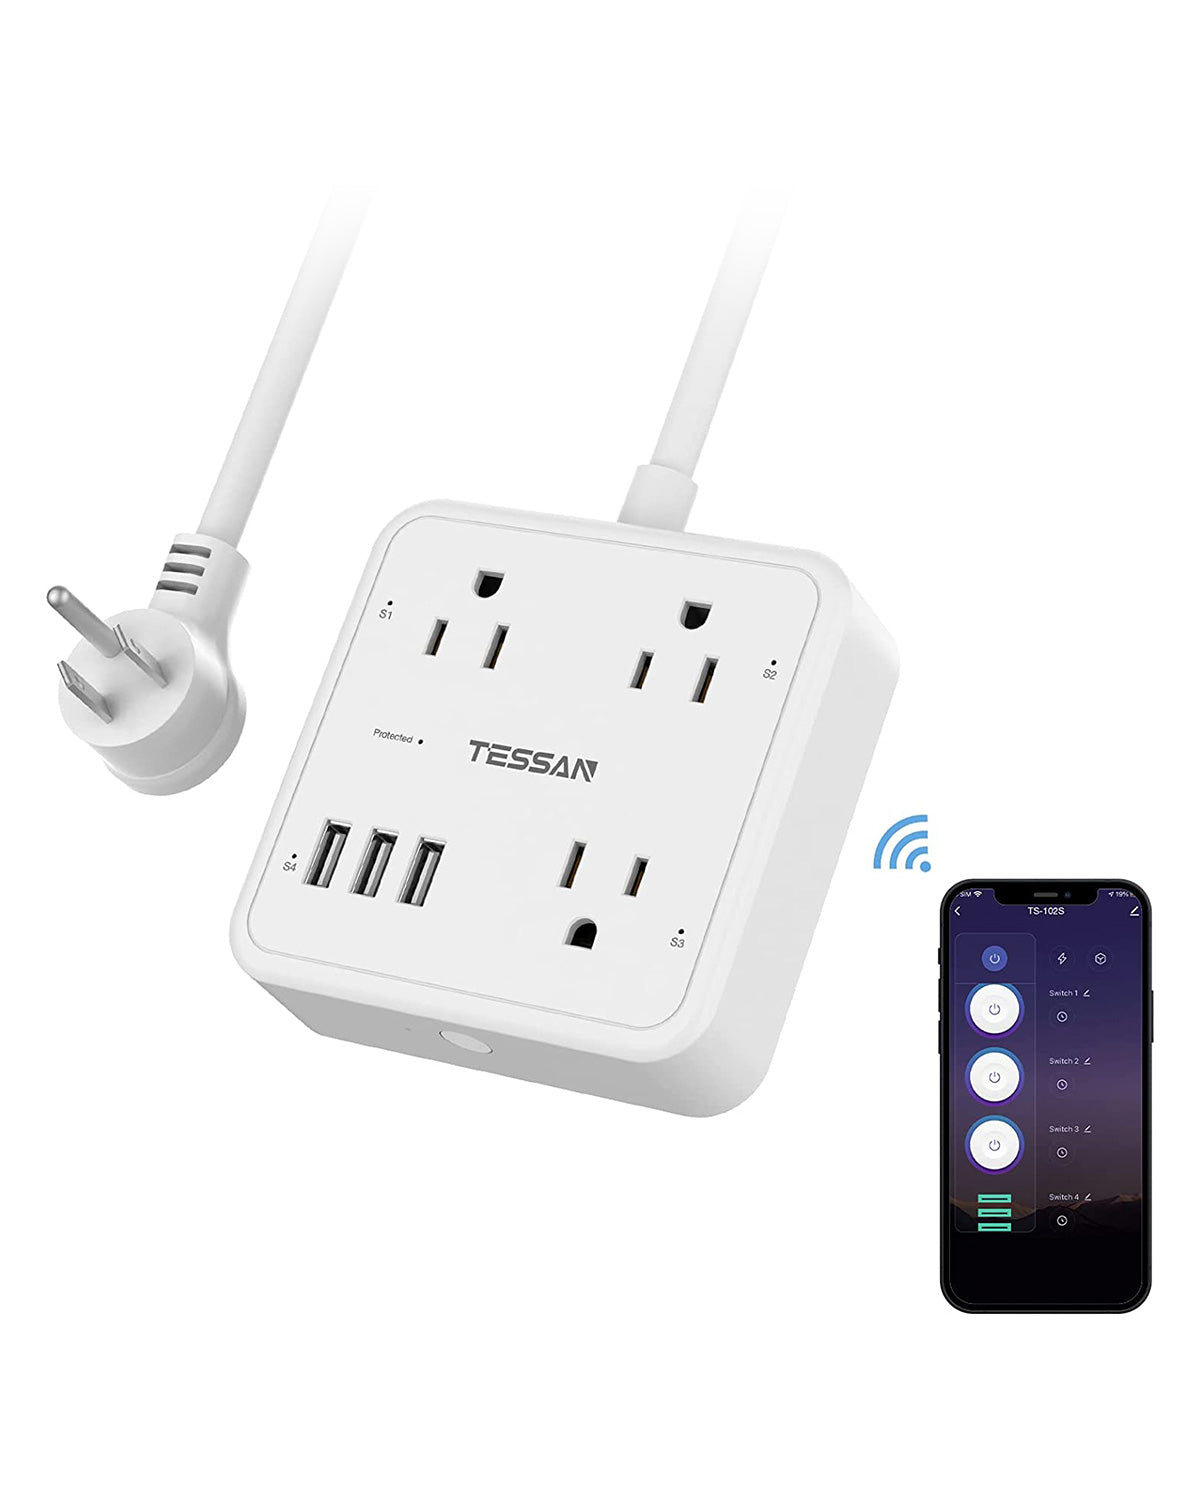 TESSAN WiFi Extension Cord with 3 Individually Remote Controlled Outlets 3 USB Ports